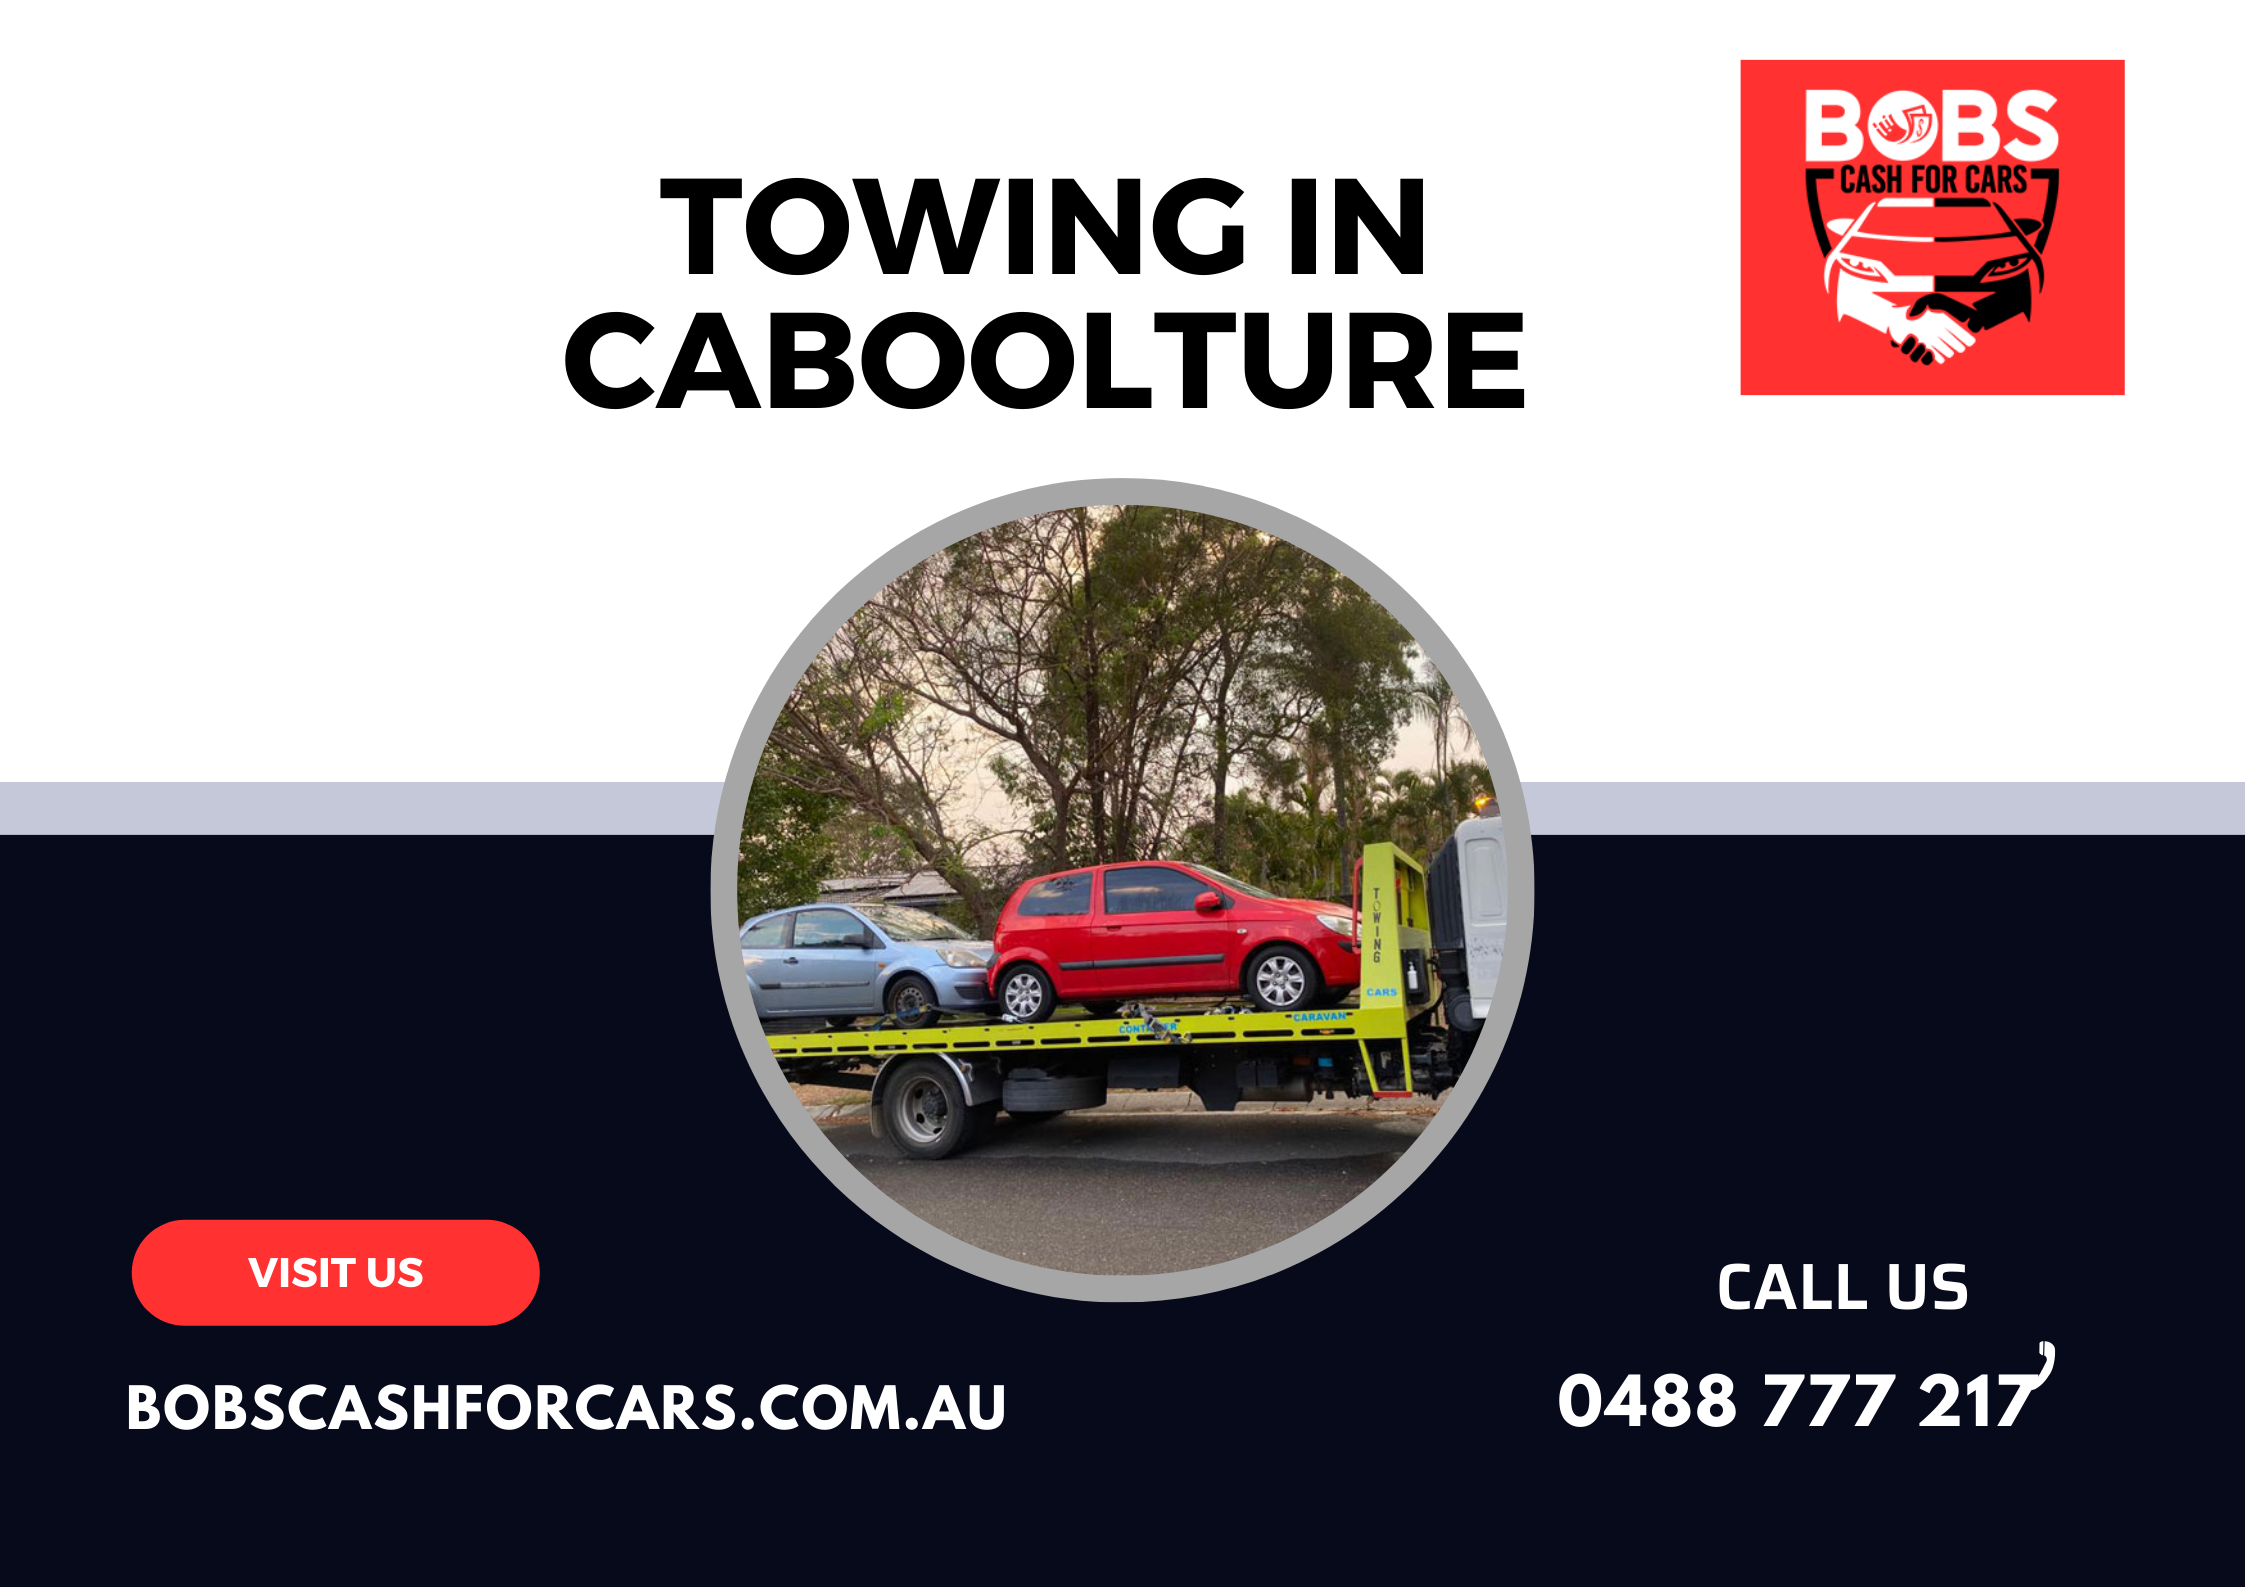  Same Day Old Car Towing in Caboolture by Skilled Experts 